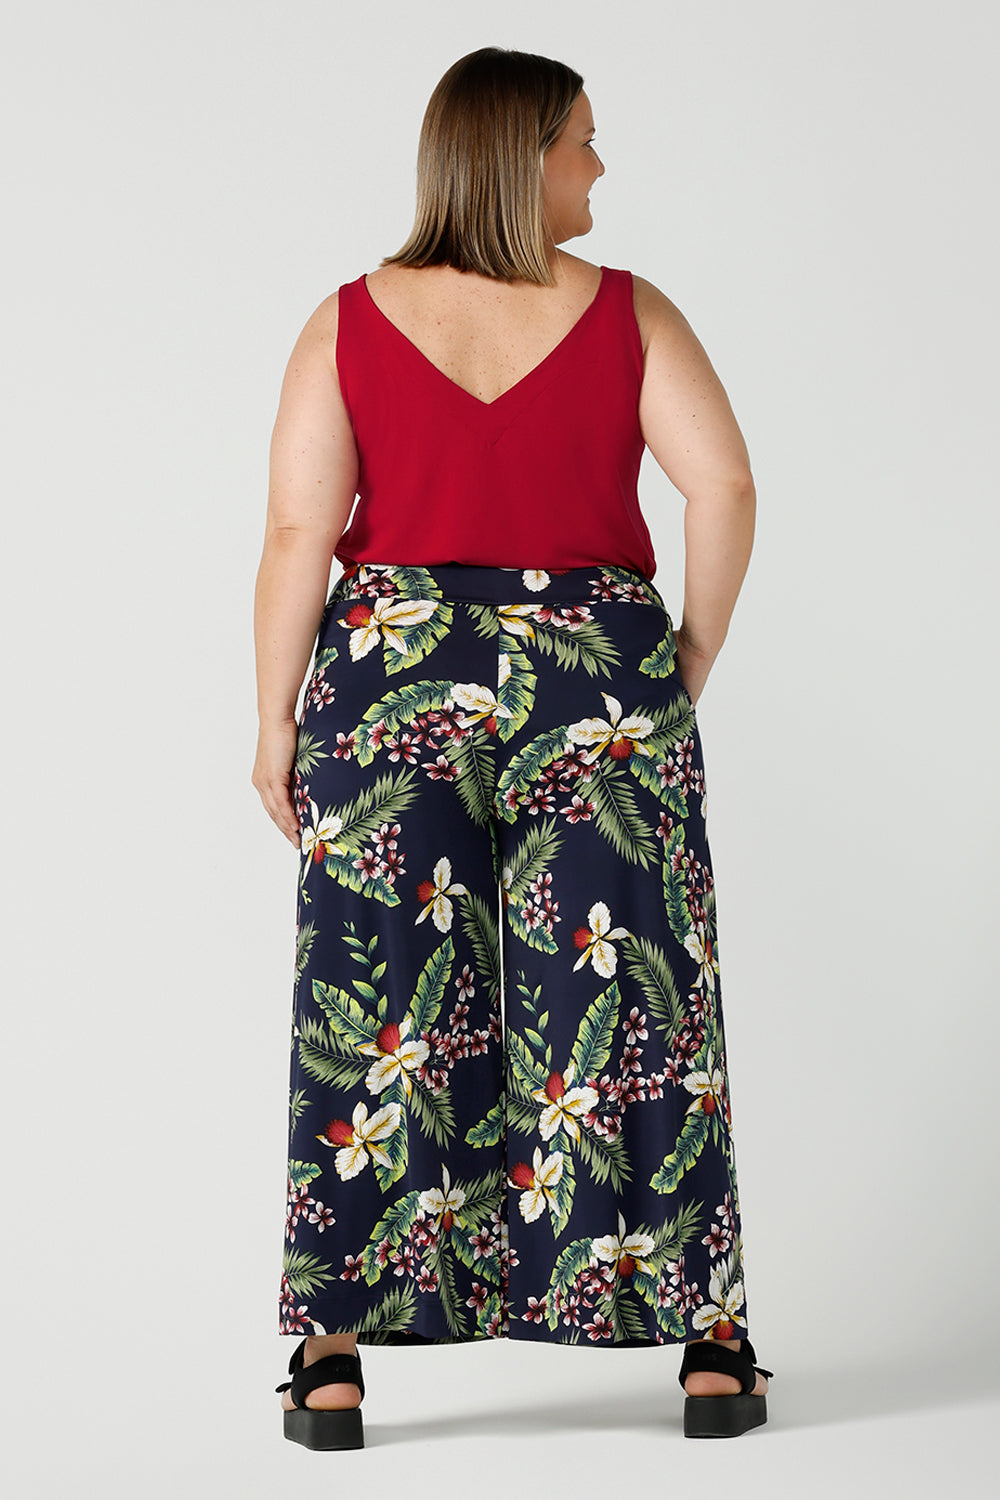 Back view of a size 18 curvy and happy woman wears a wide leg dany culotte in in Merriment back with a red cami top. The perfect comfortable Christmas outfit. Made in Australia for women size 8-24.